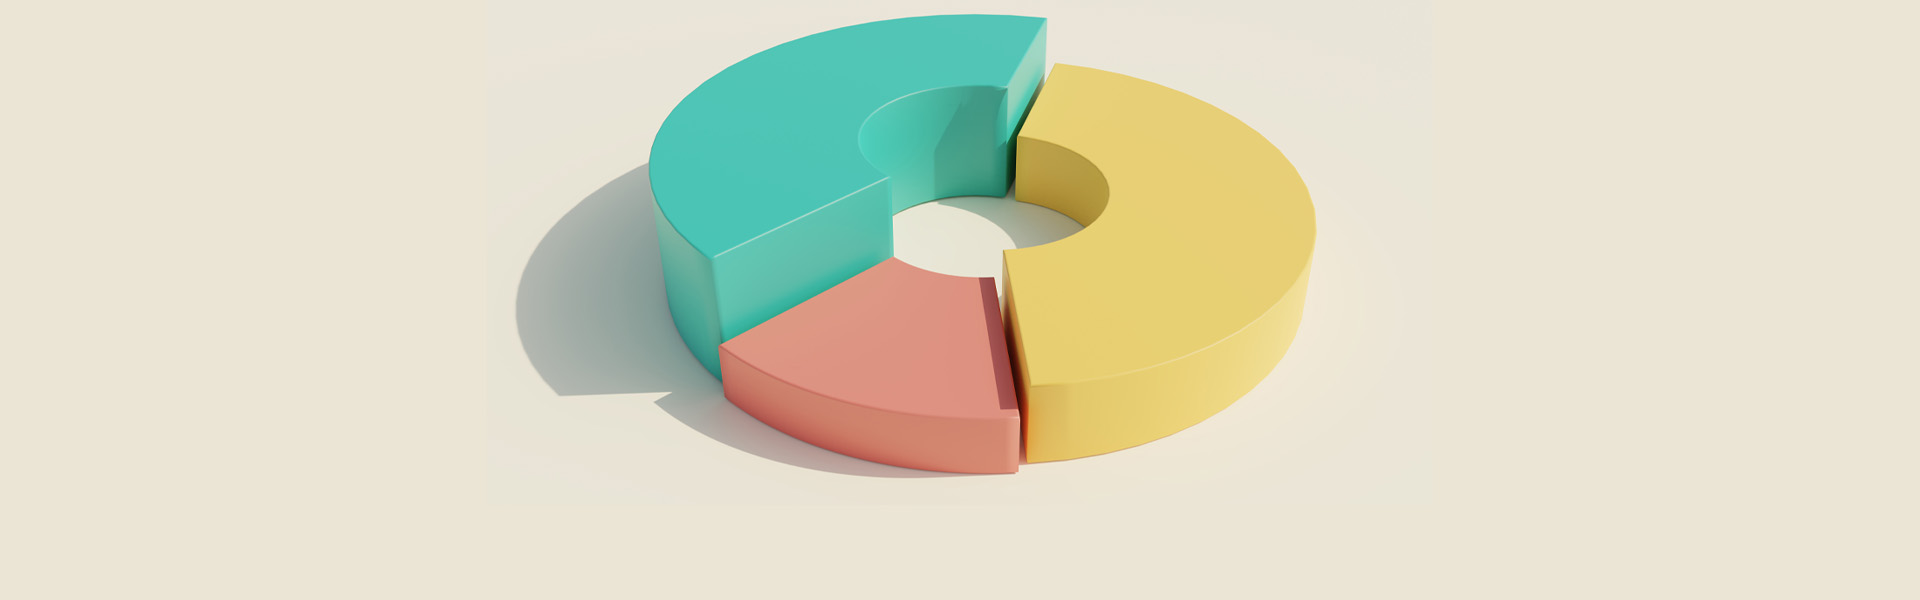 Isometric Donut chart. Financial analysis concept.